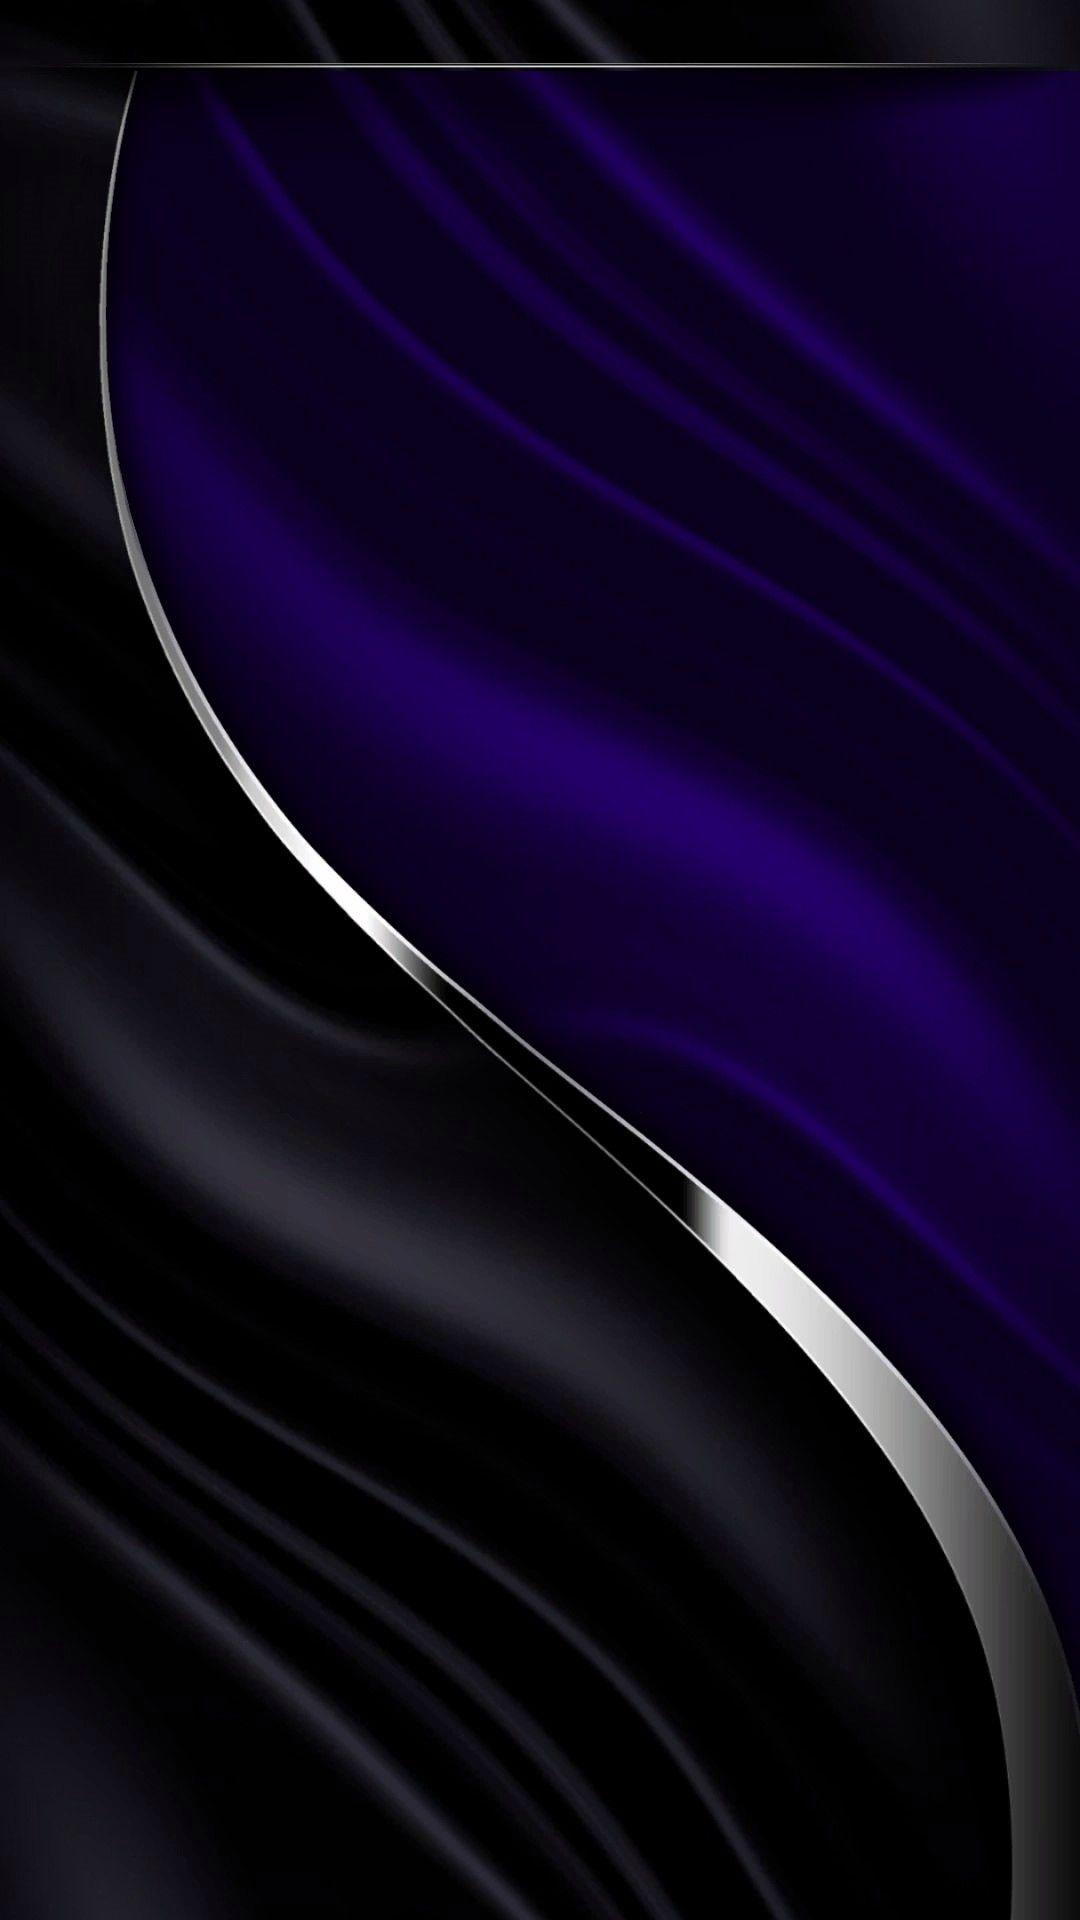 Black & Blue & Silver, too. Abstract iphone wallpaper, Abstract wallpaper, Phone wallpaper patterns